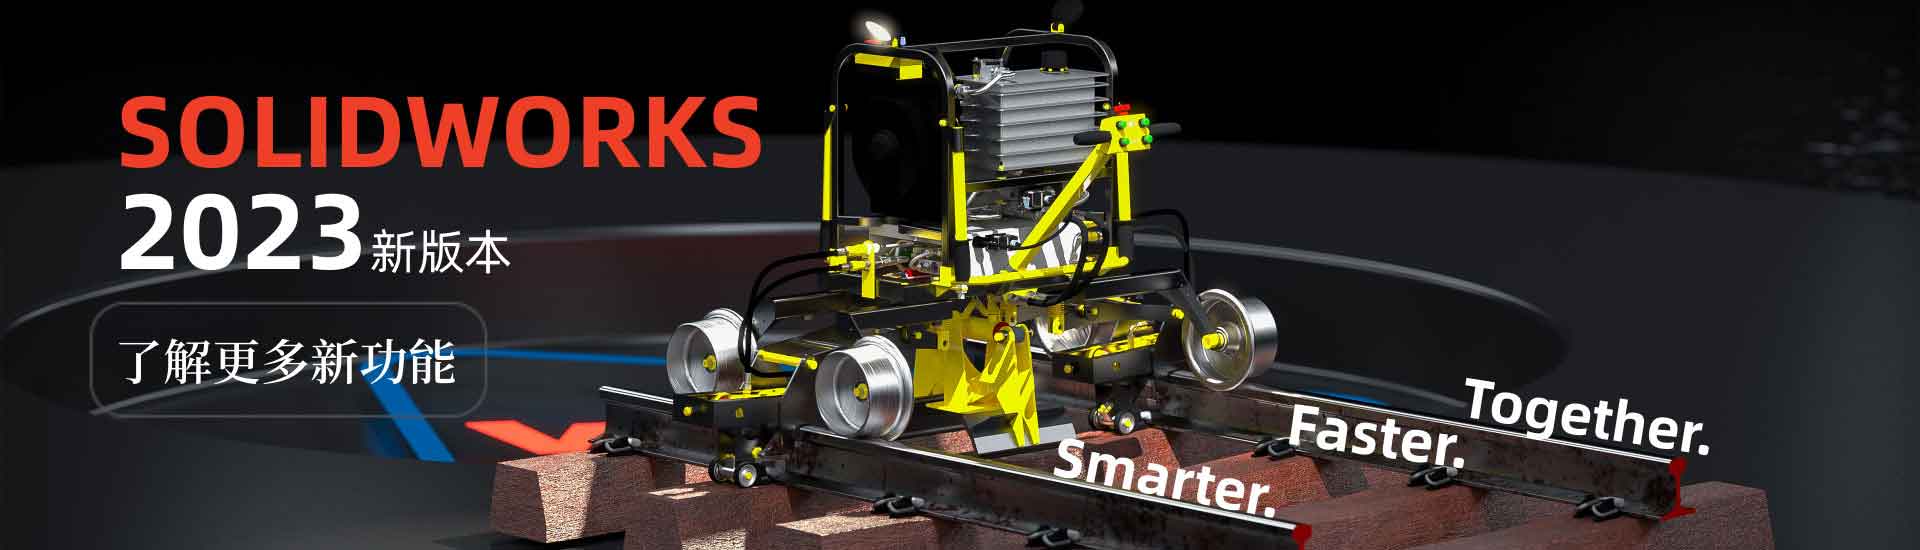 solidworks2023_new